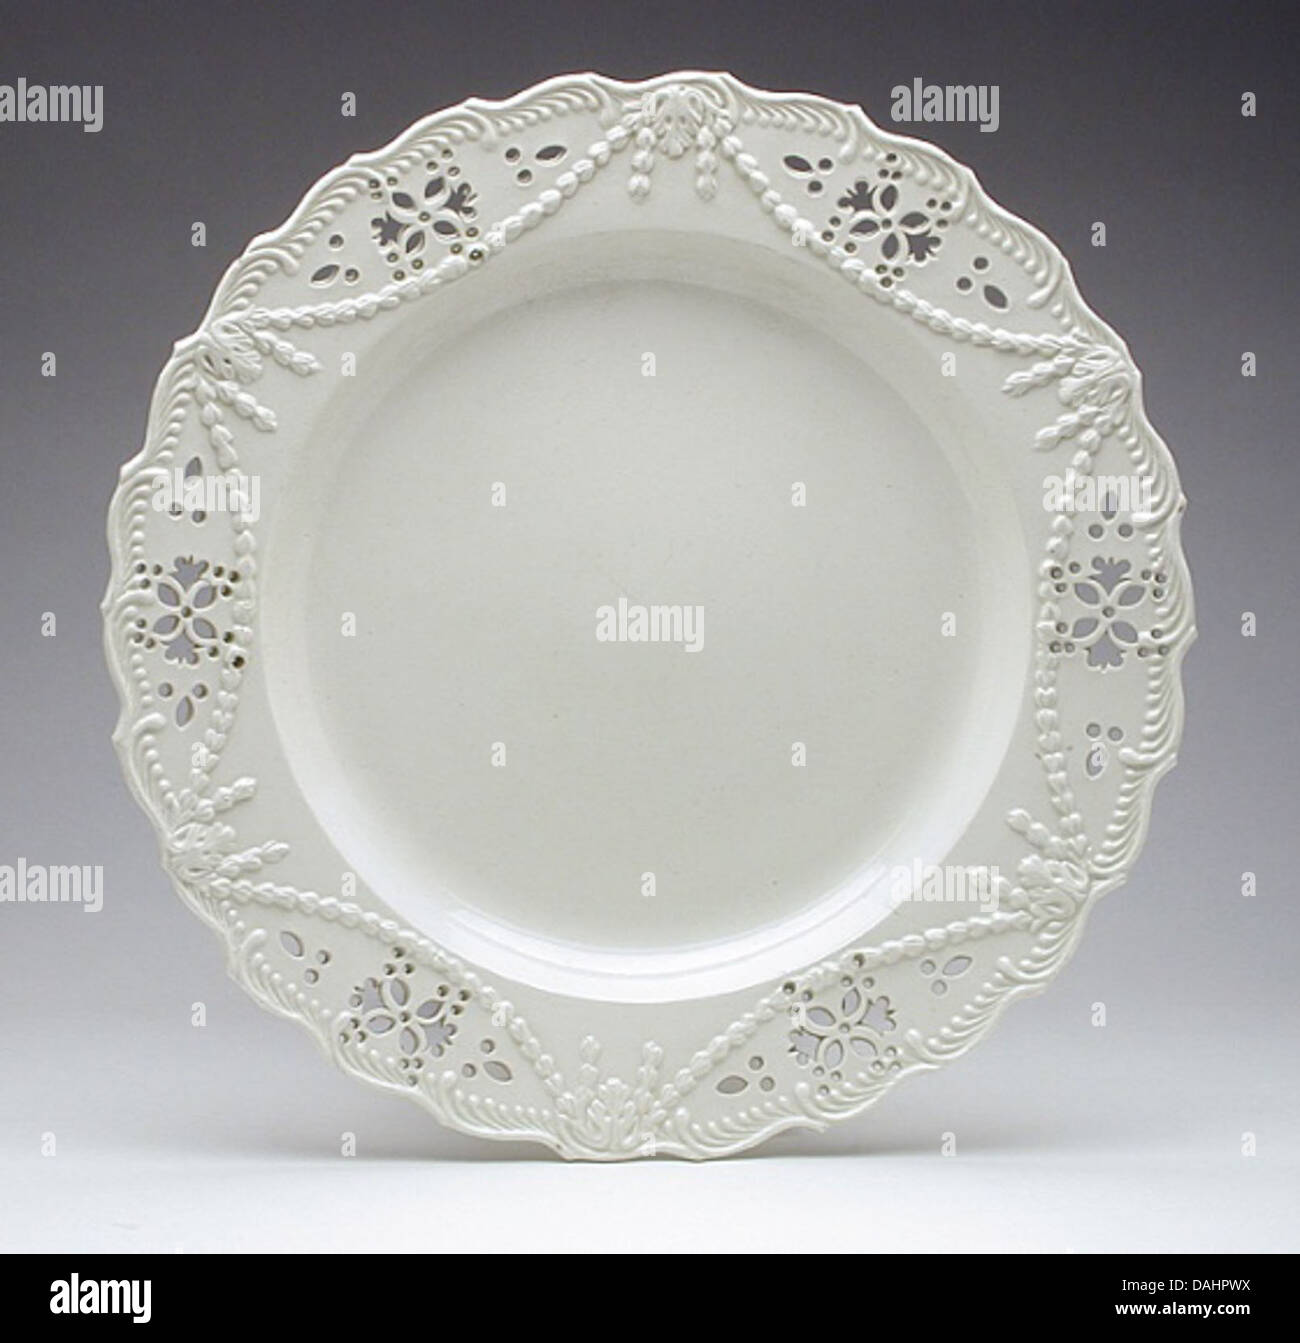 Pair of Plates LACMA AC1997.112.43-.44 (1 of 2) Stock Photo